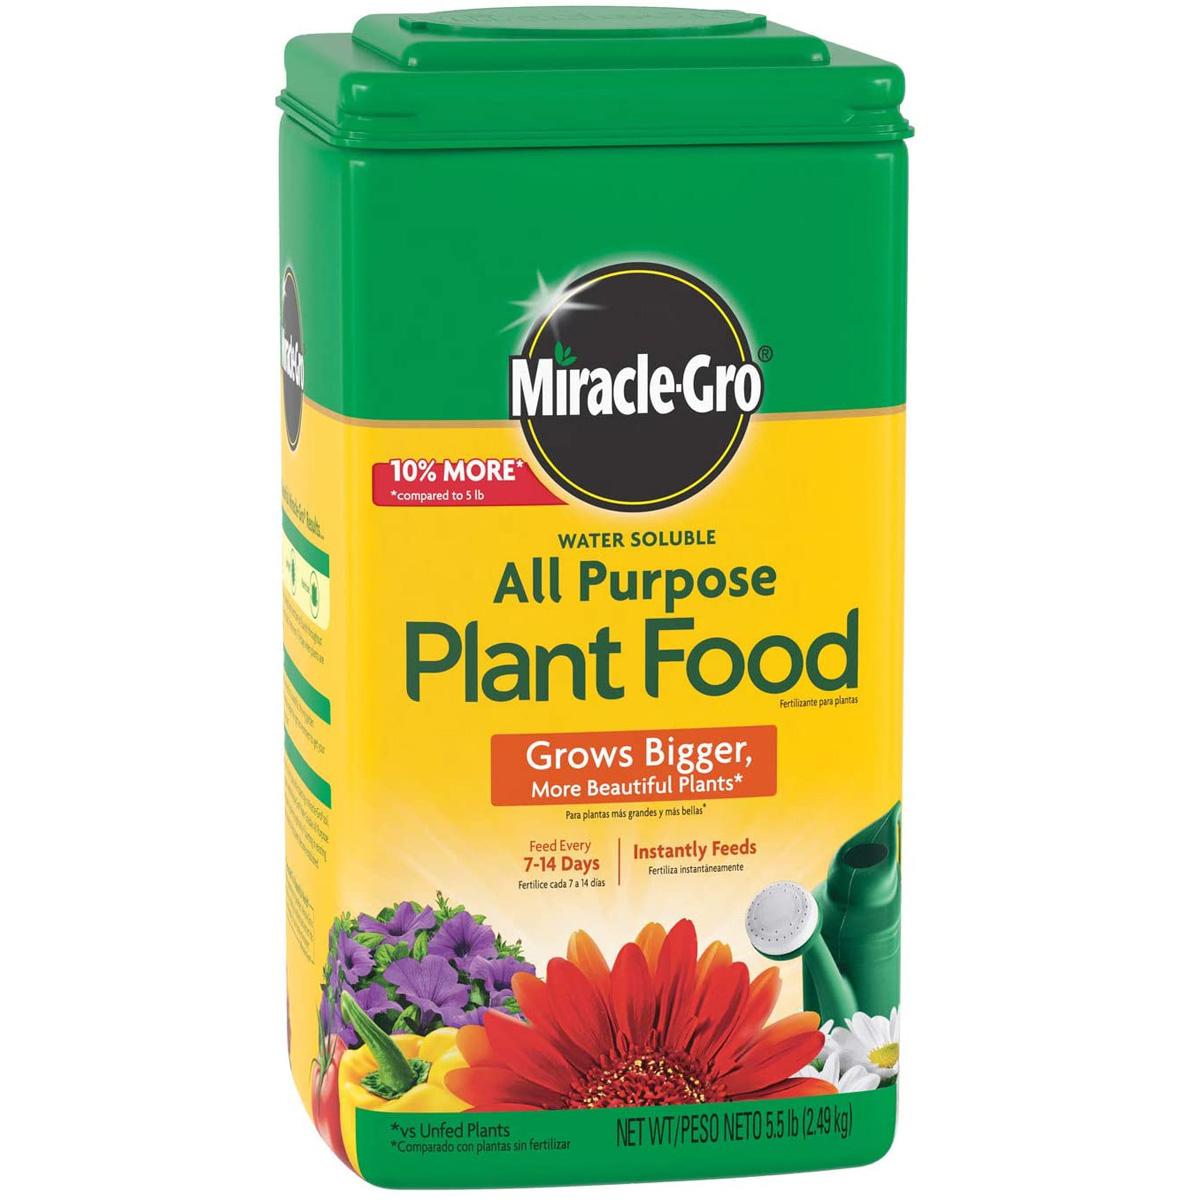 Miracle-Gro Water Soluble All Purpose Plant Food for $10.48